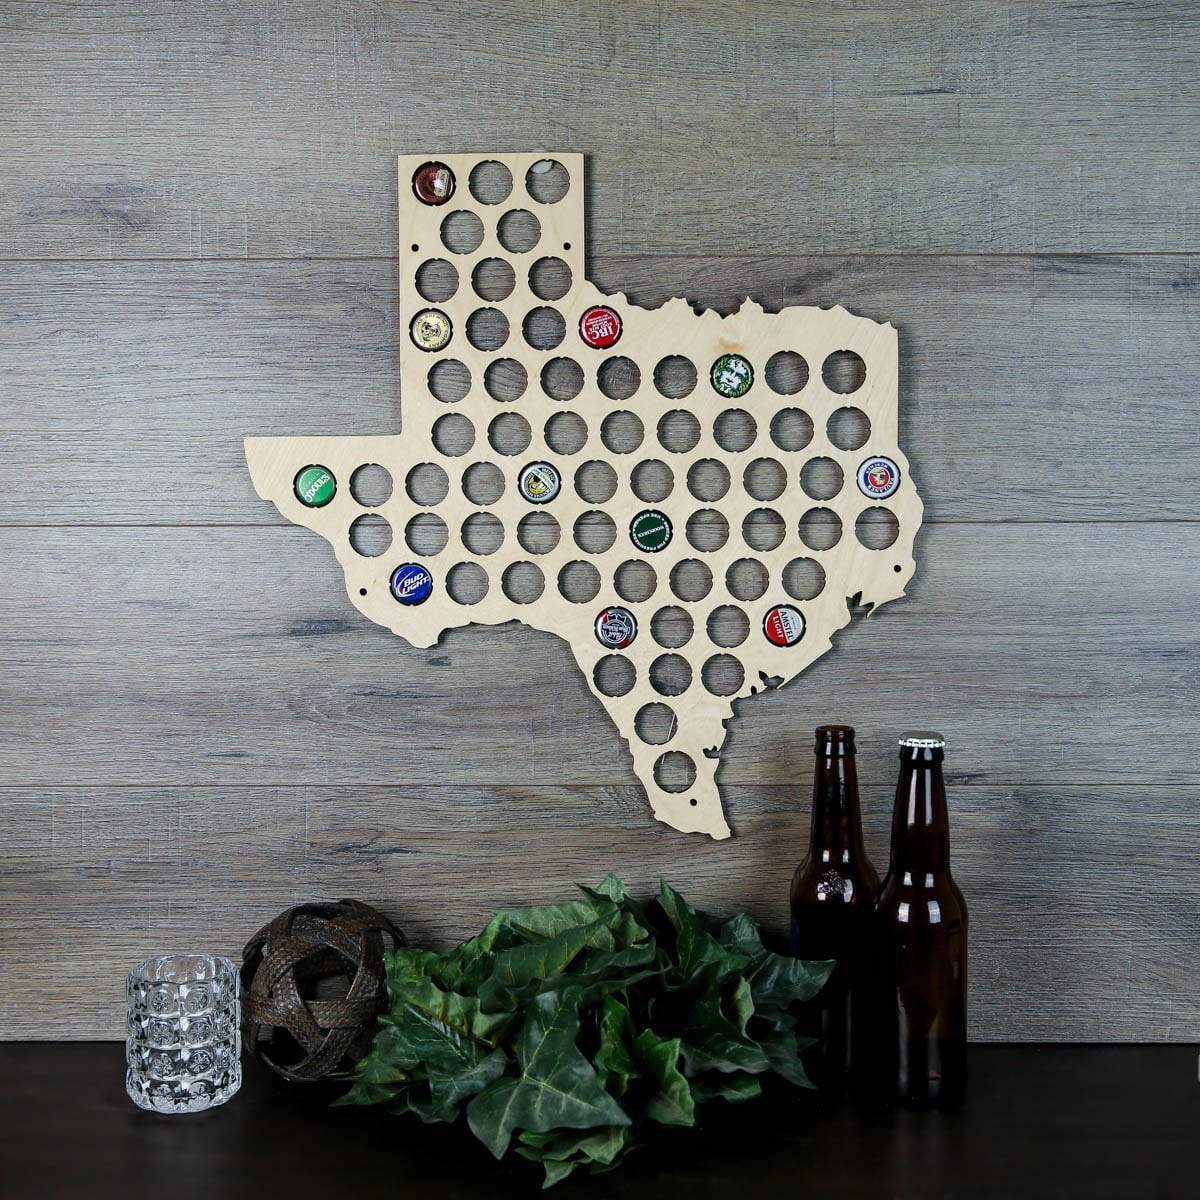 Torched Products Beer Cap Map Texas Beer Cap Map